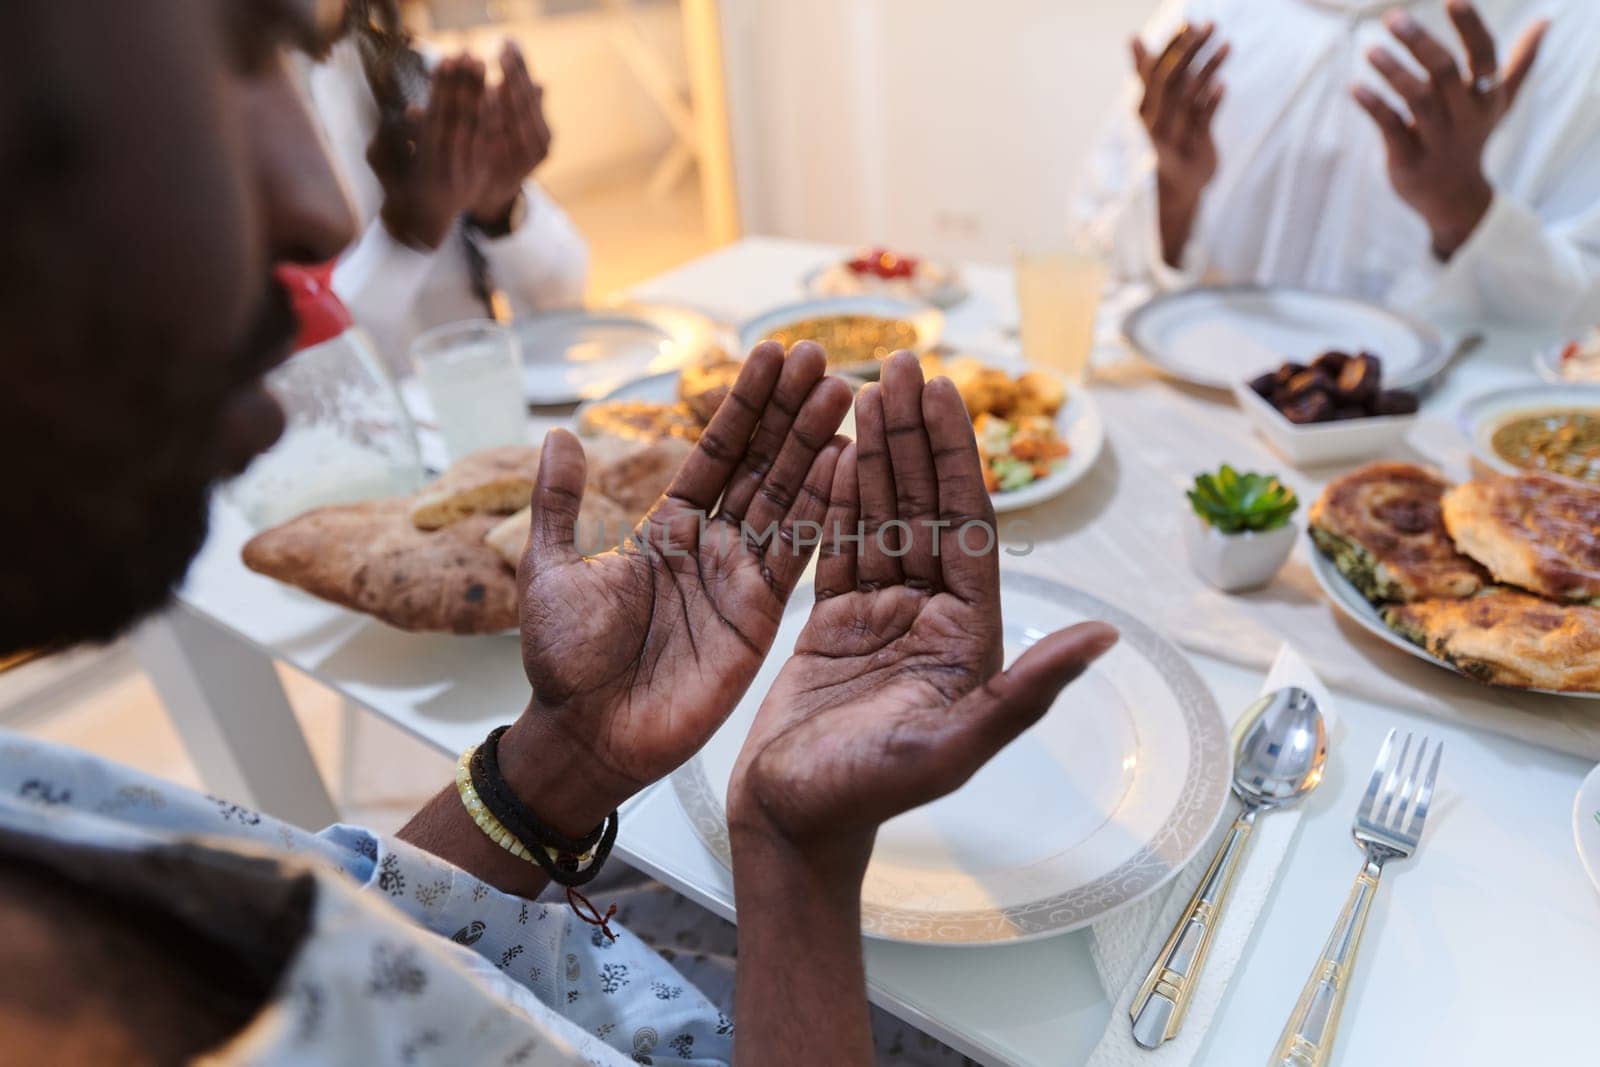 In the sacred month of Ramadan, a diverse Muslim family comes together in spiritual unity, fervently praying to God before breaking their fast, capturing a moment of collective devotion, cultural diversity, and familial joy in the midst of the holy celebration by dotshock